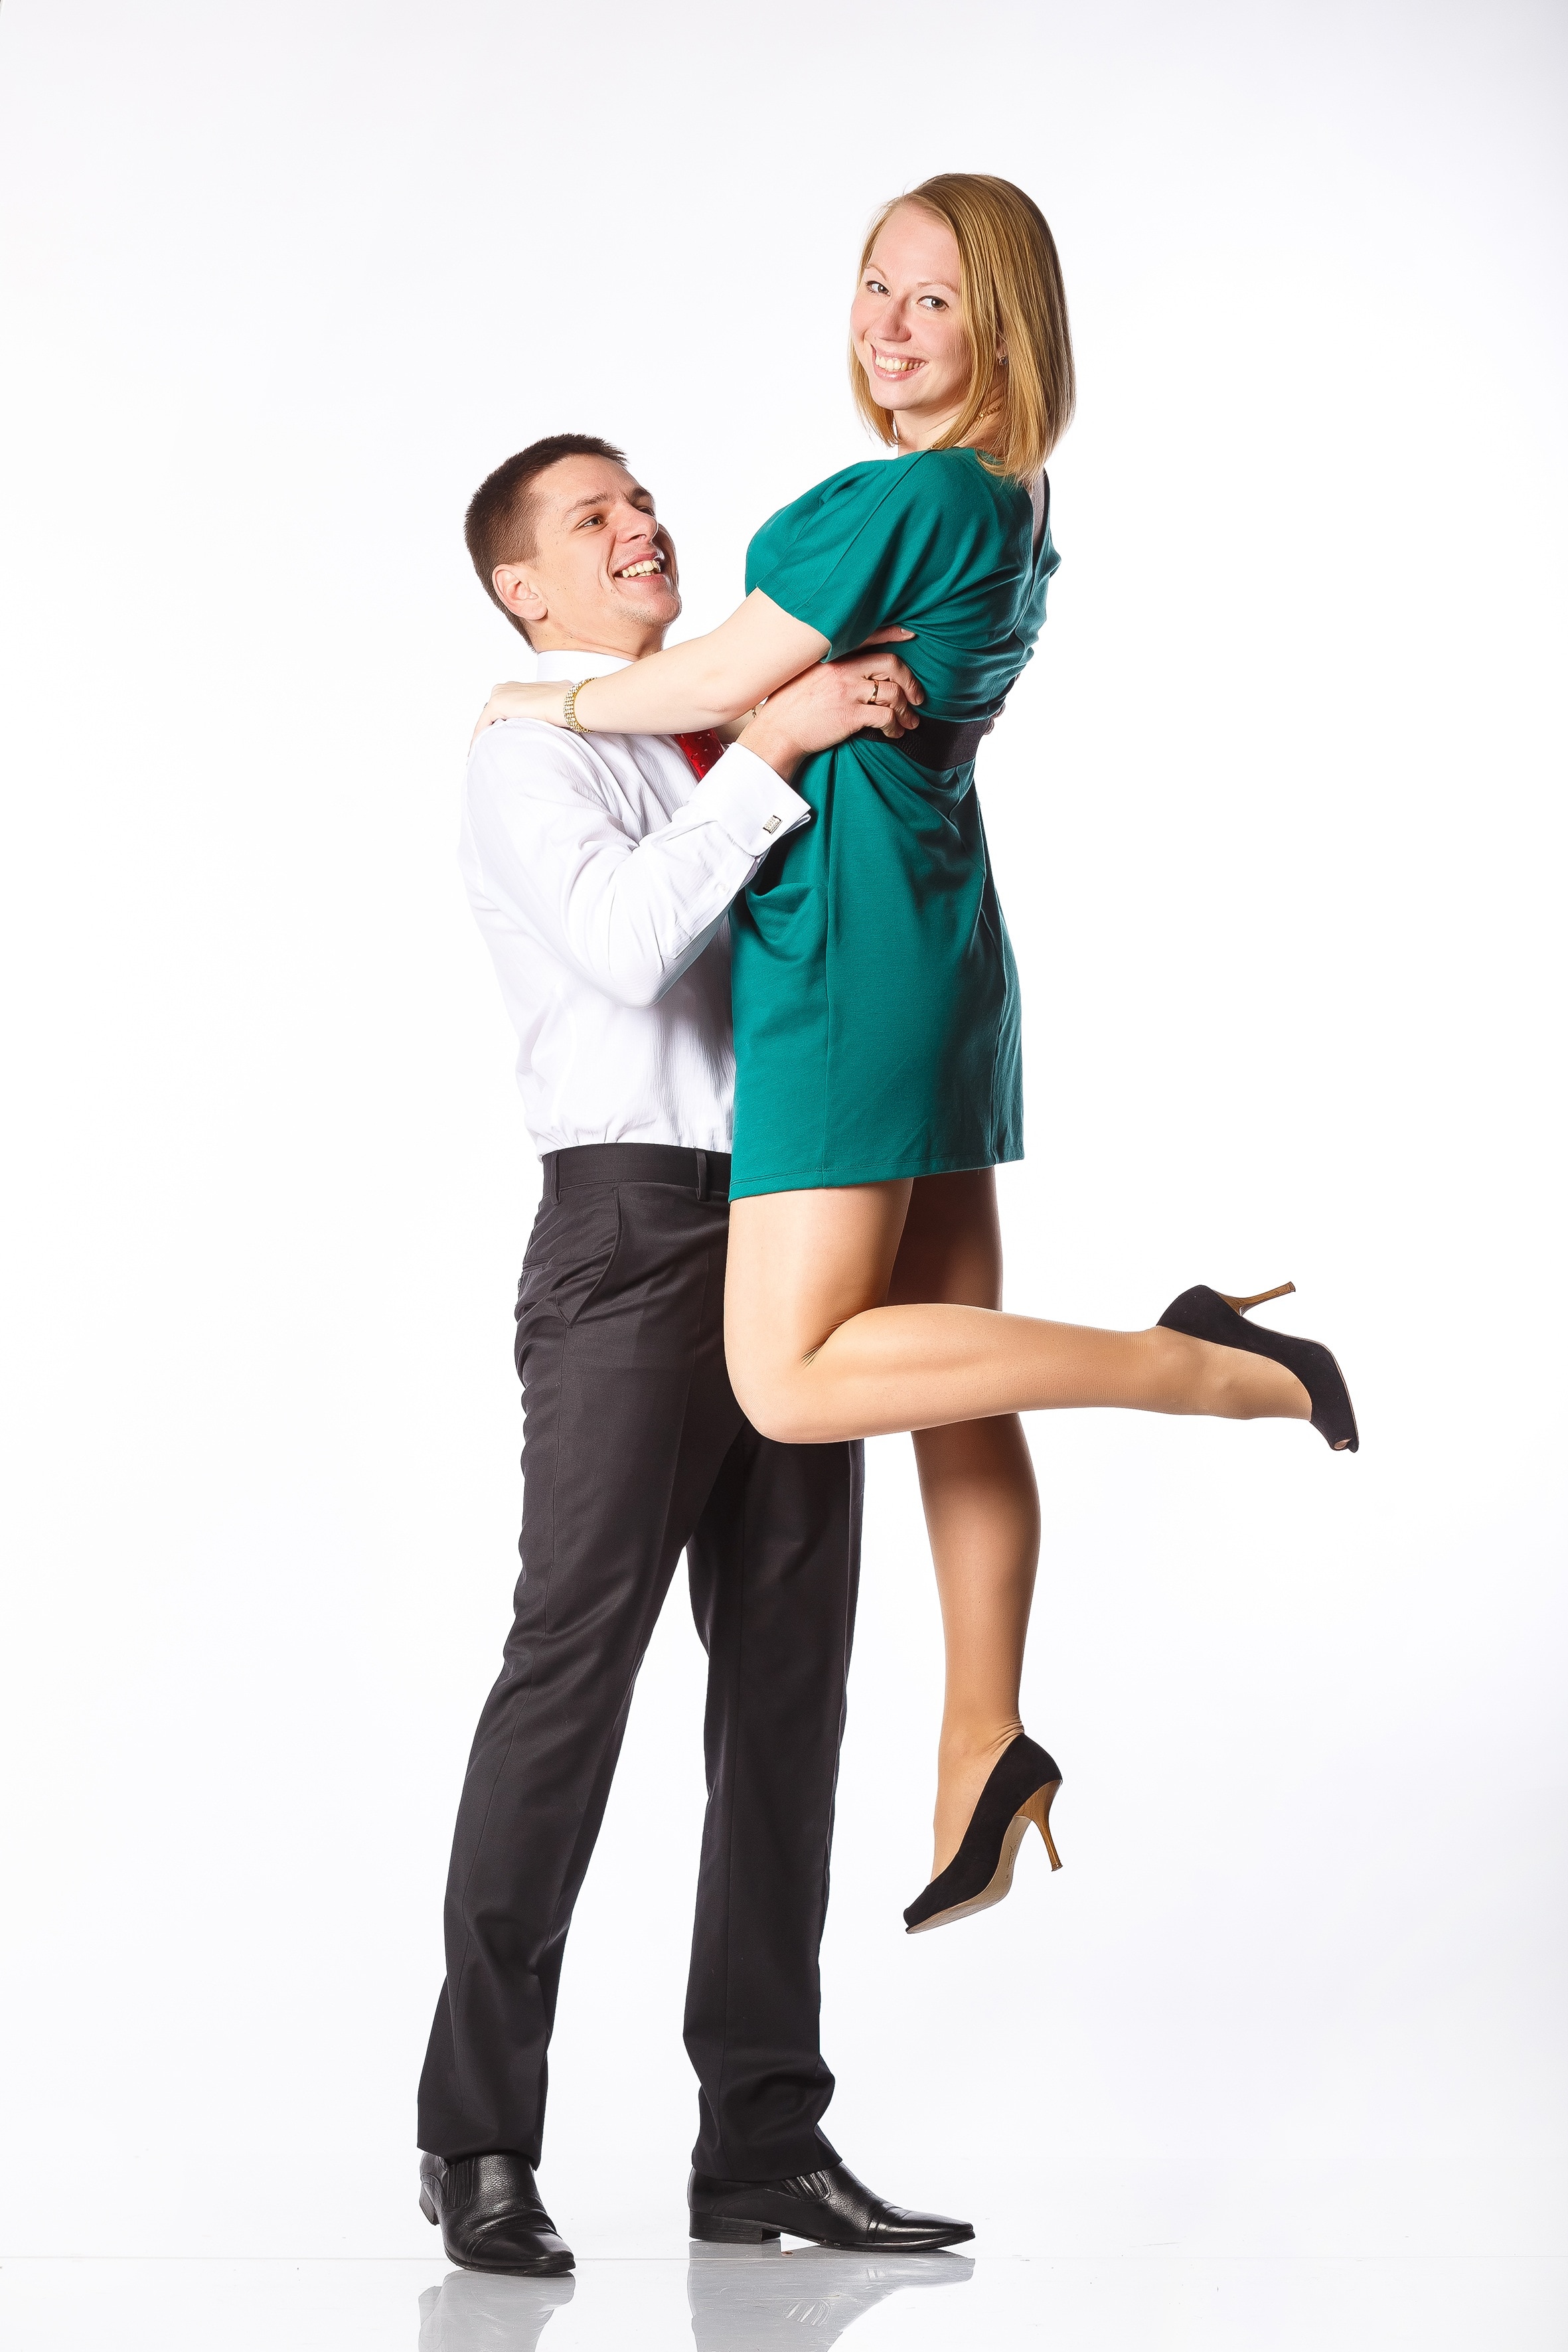 1536x2048 Wallpaper Man Lifting Woman In Green Mini Dress With White As Background Peakpx